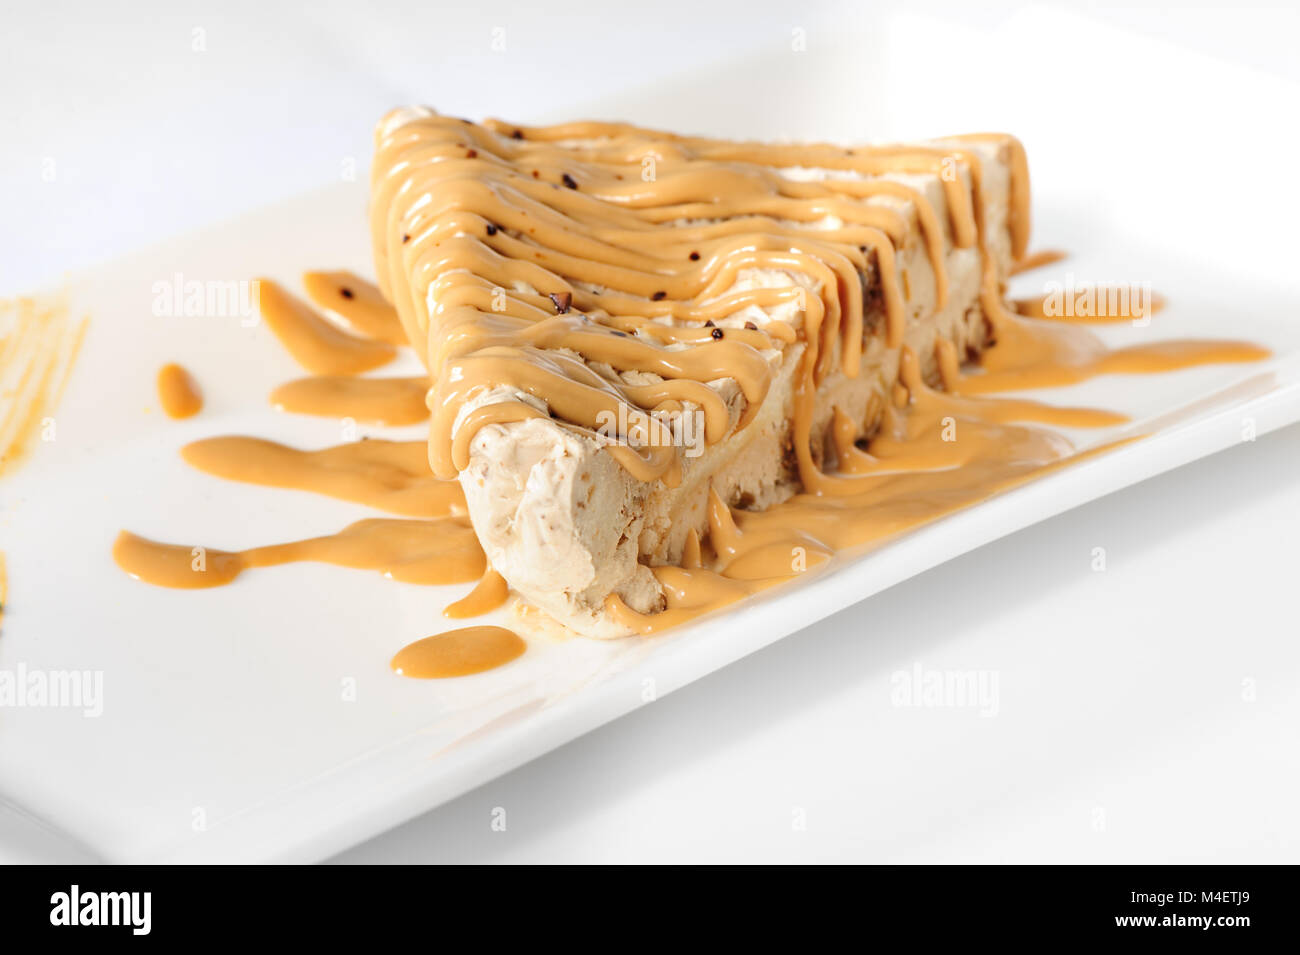 Delicious cheesecake with caramel topping Stock Photo